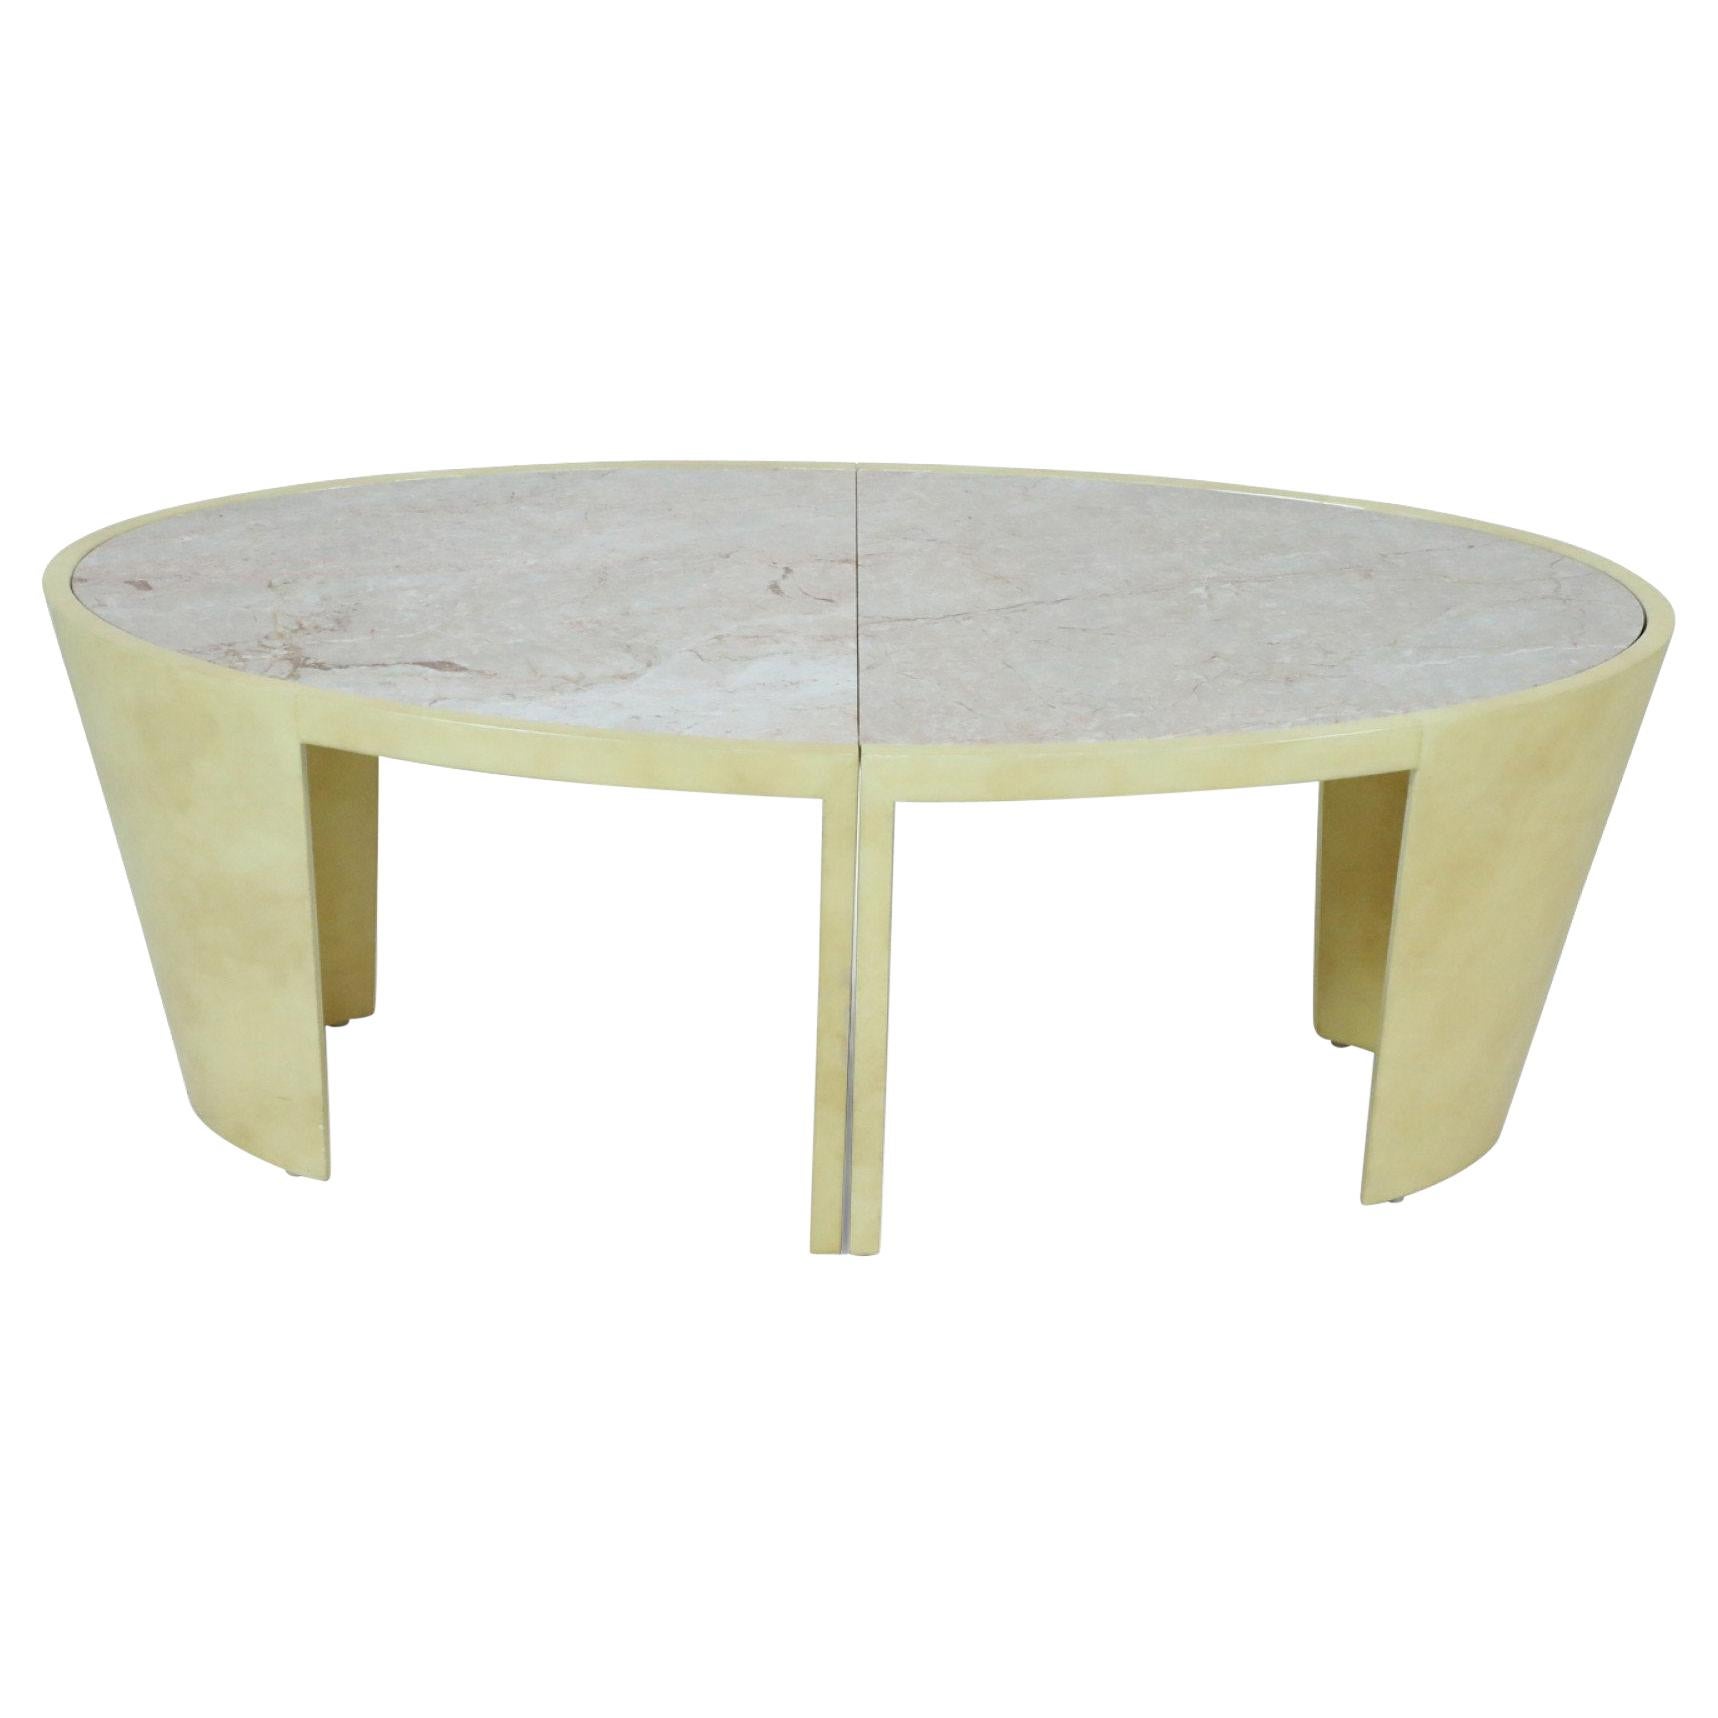 Italian Post-Modern Two-Piece Oval Parchment and Marble Coffee Table